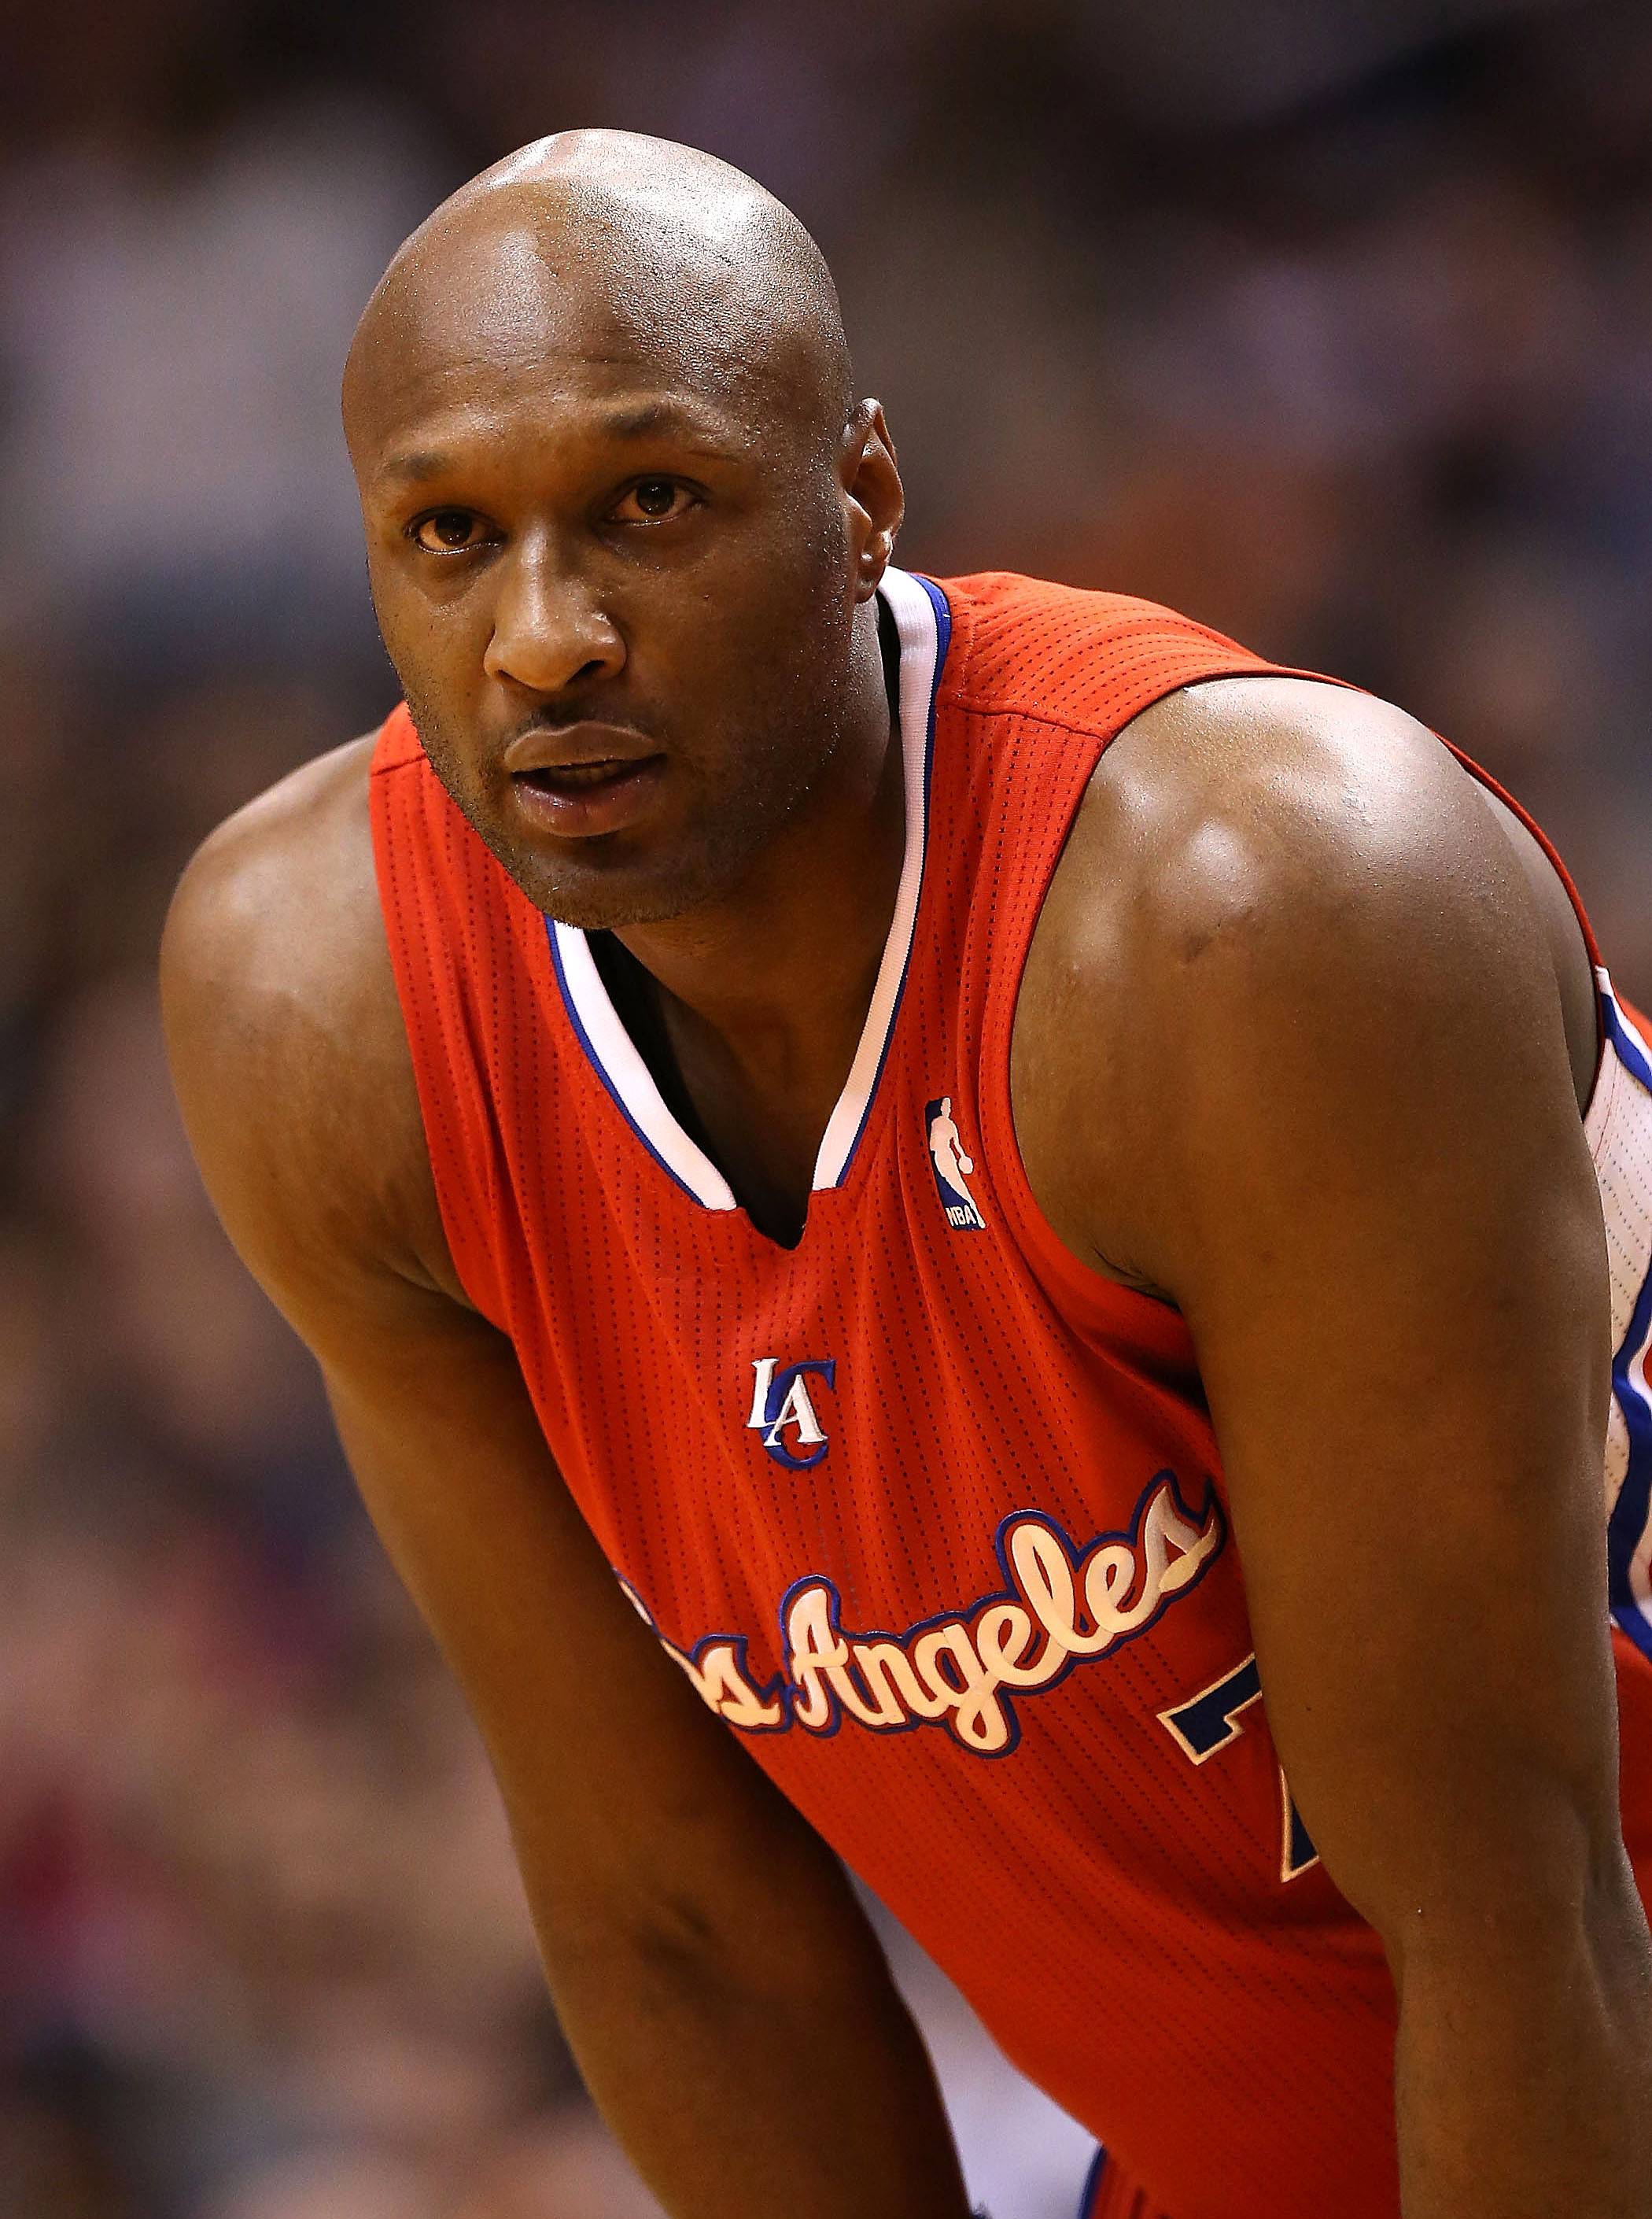 Lamar Odom Gets His - Image 1 from Lamar Odom's Ups and Downs